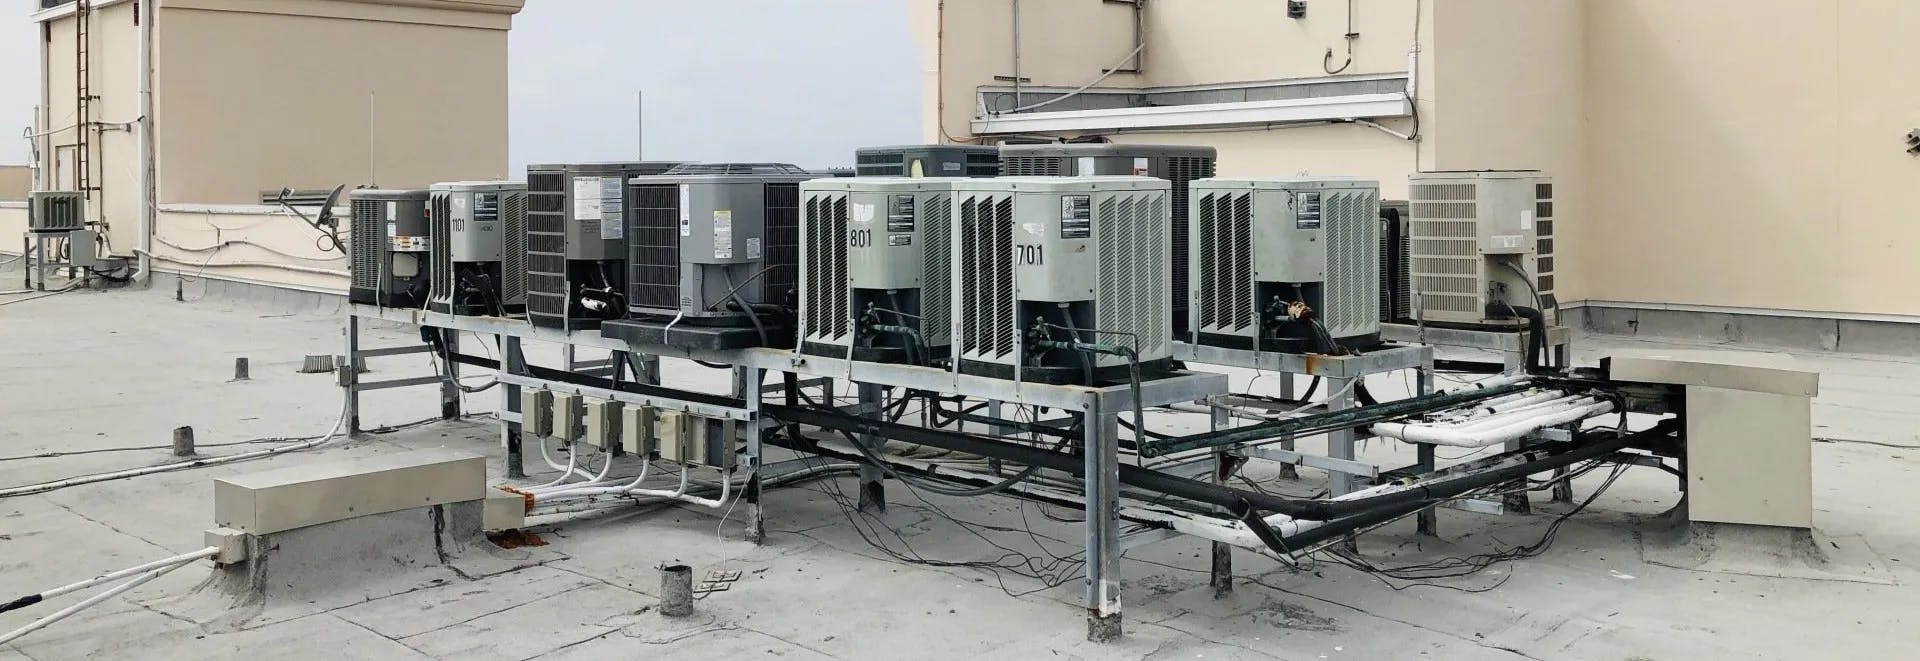 HVAC (Heat, Ventilation, and Air Conditioning) Units on rooftop 